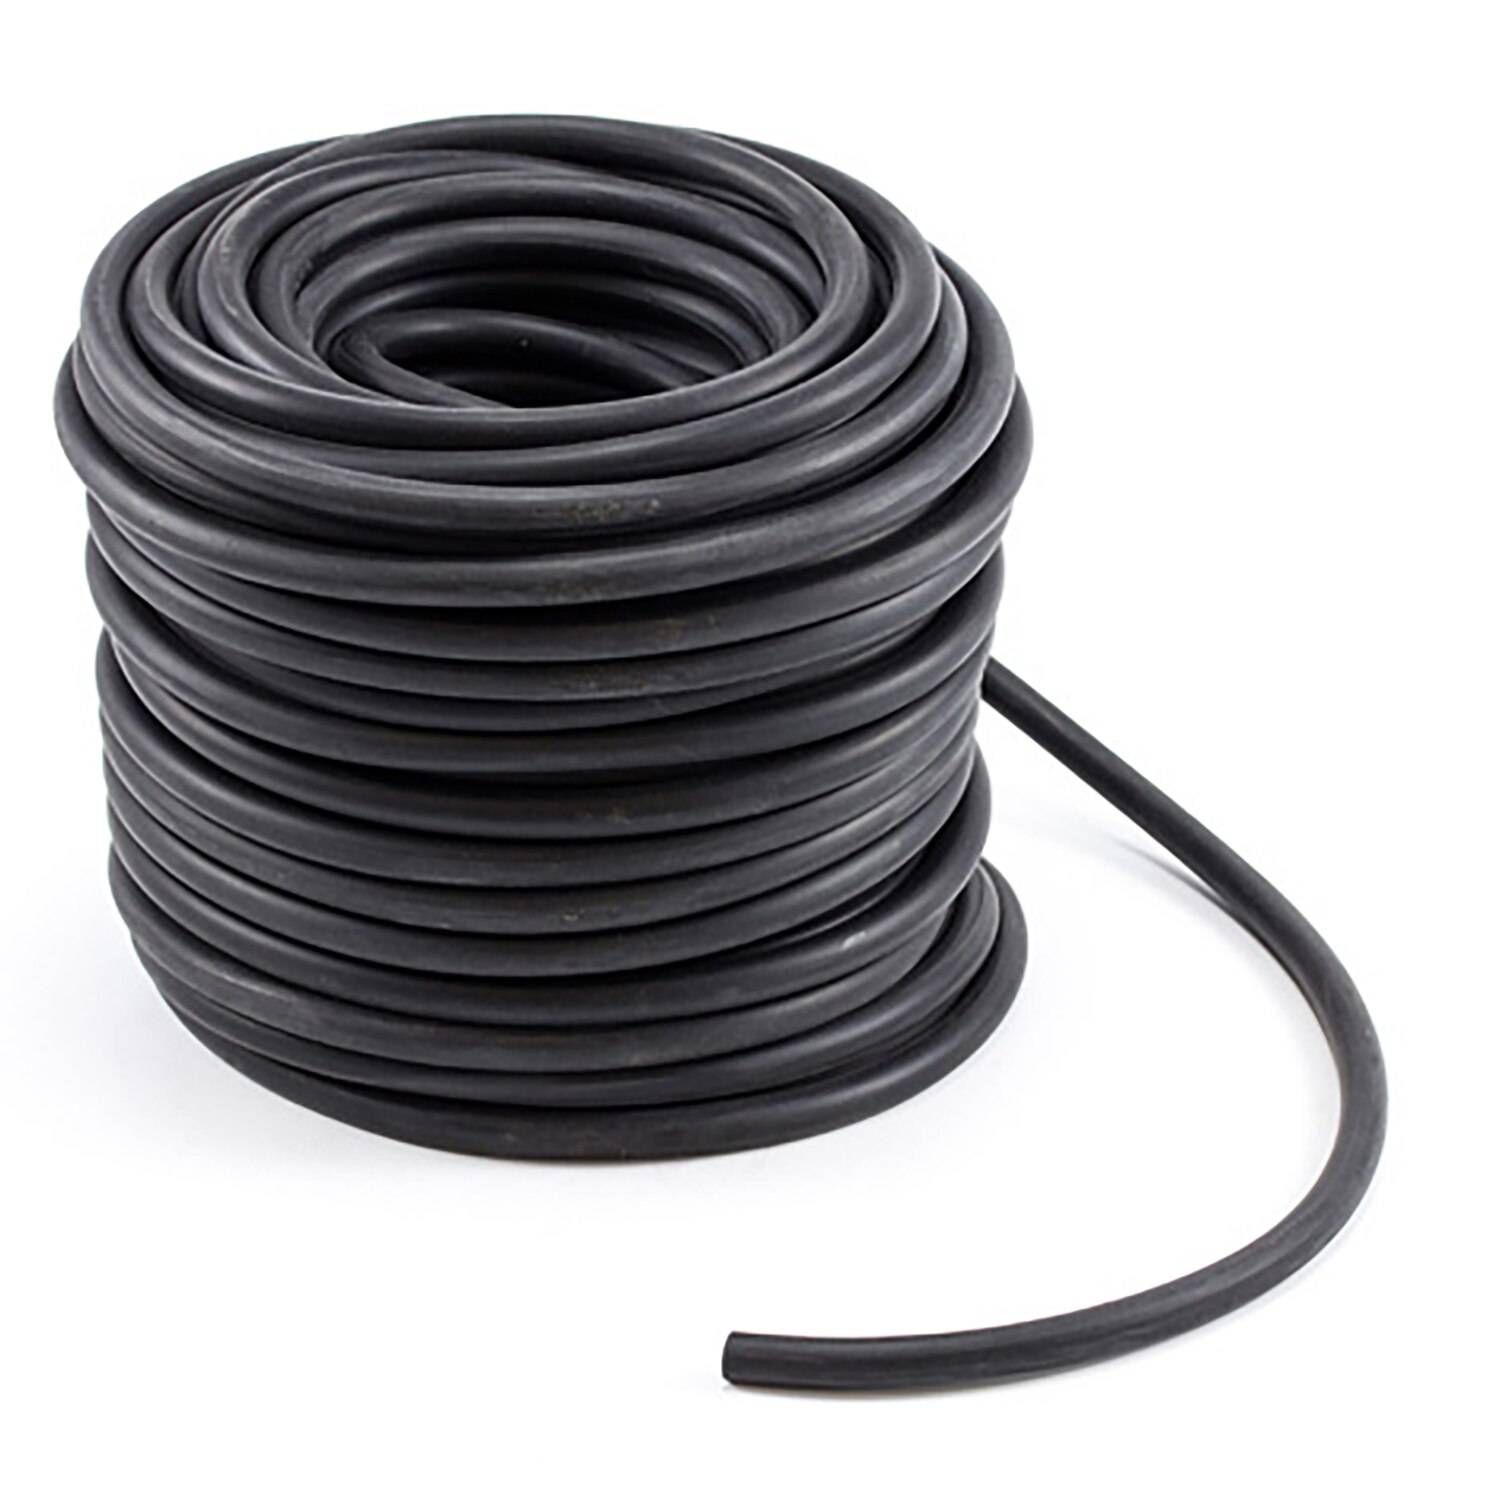 Synthetic Rubber (EPDM) Rope 7/16 Coil with 150 Double Eye Hooks 933043702  (150 feet)